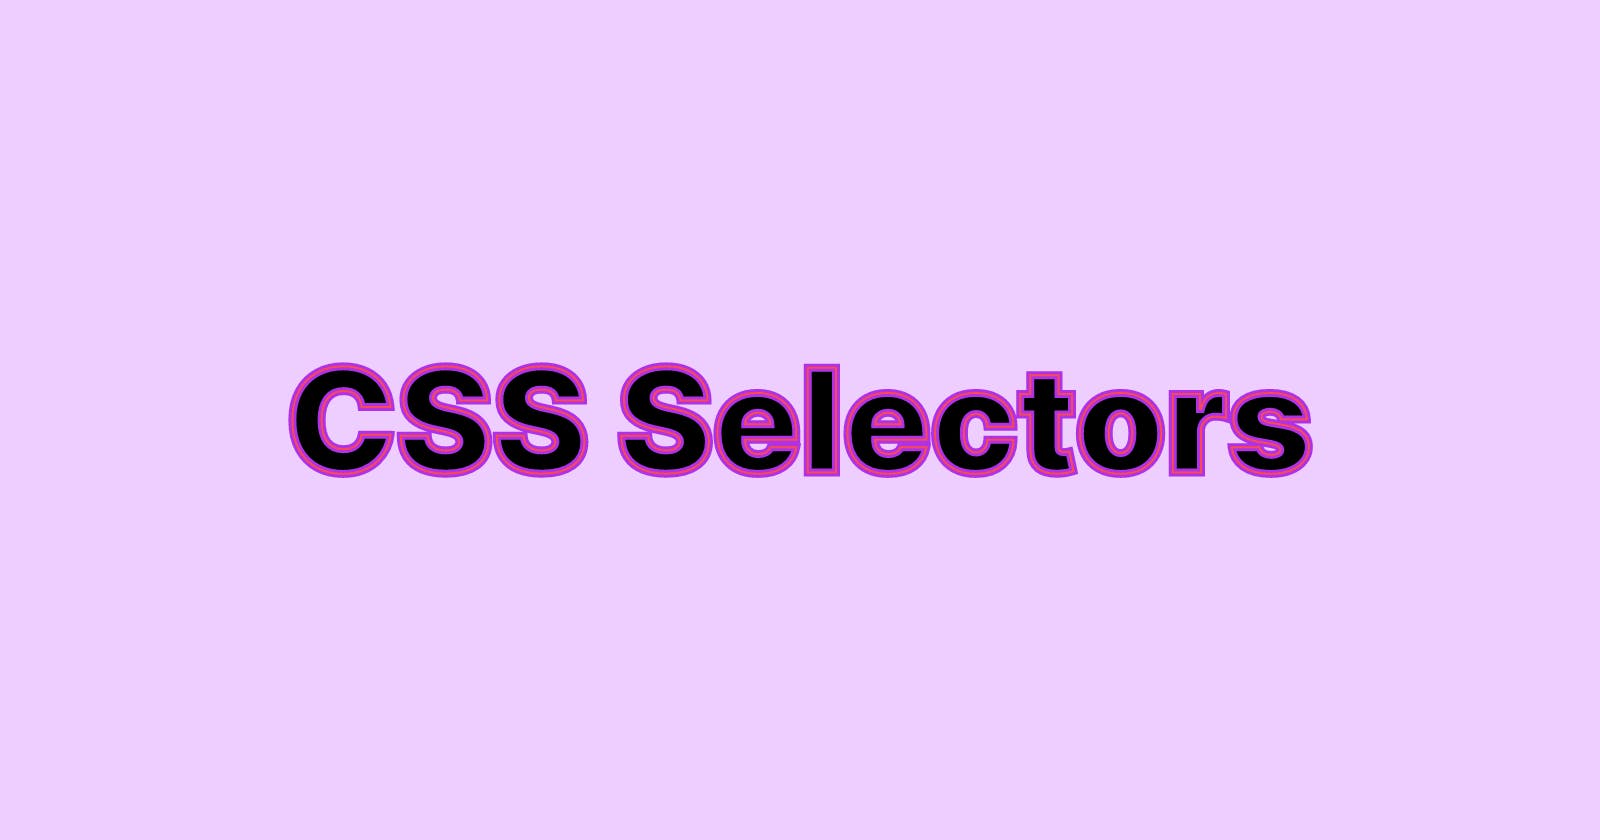 Demystifying the Power of CSS Selectors